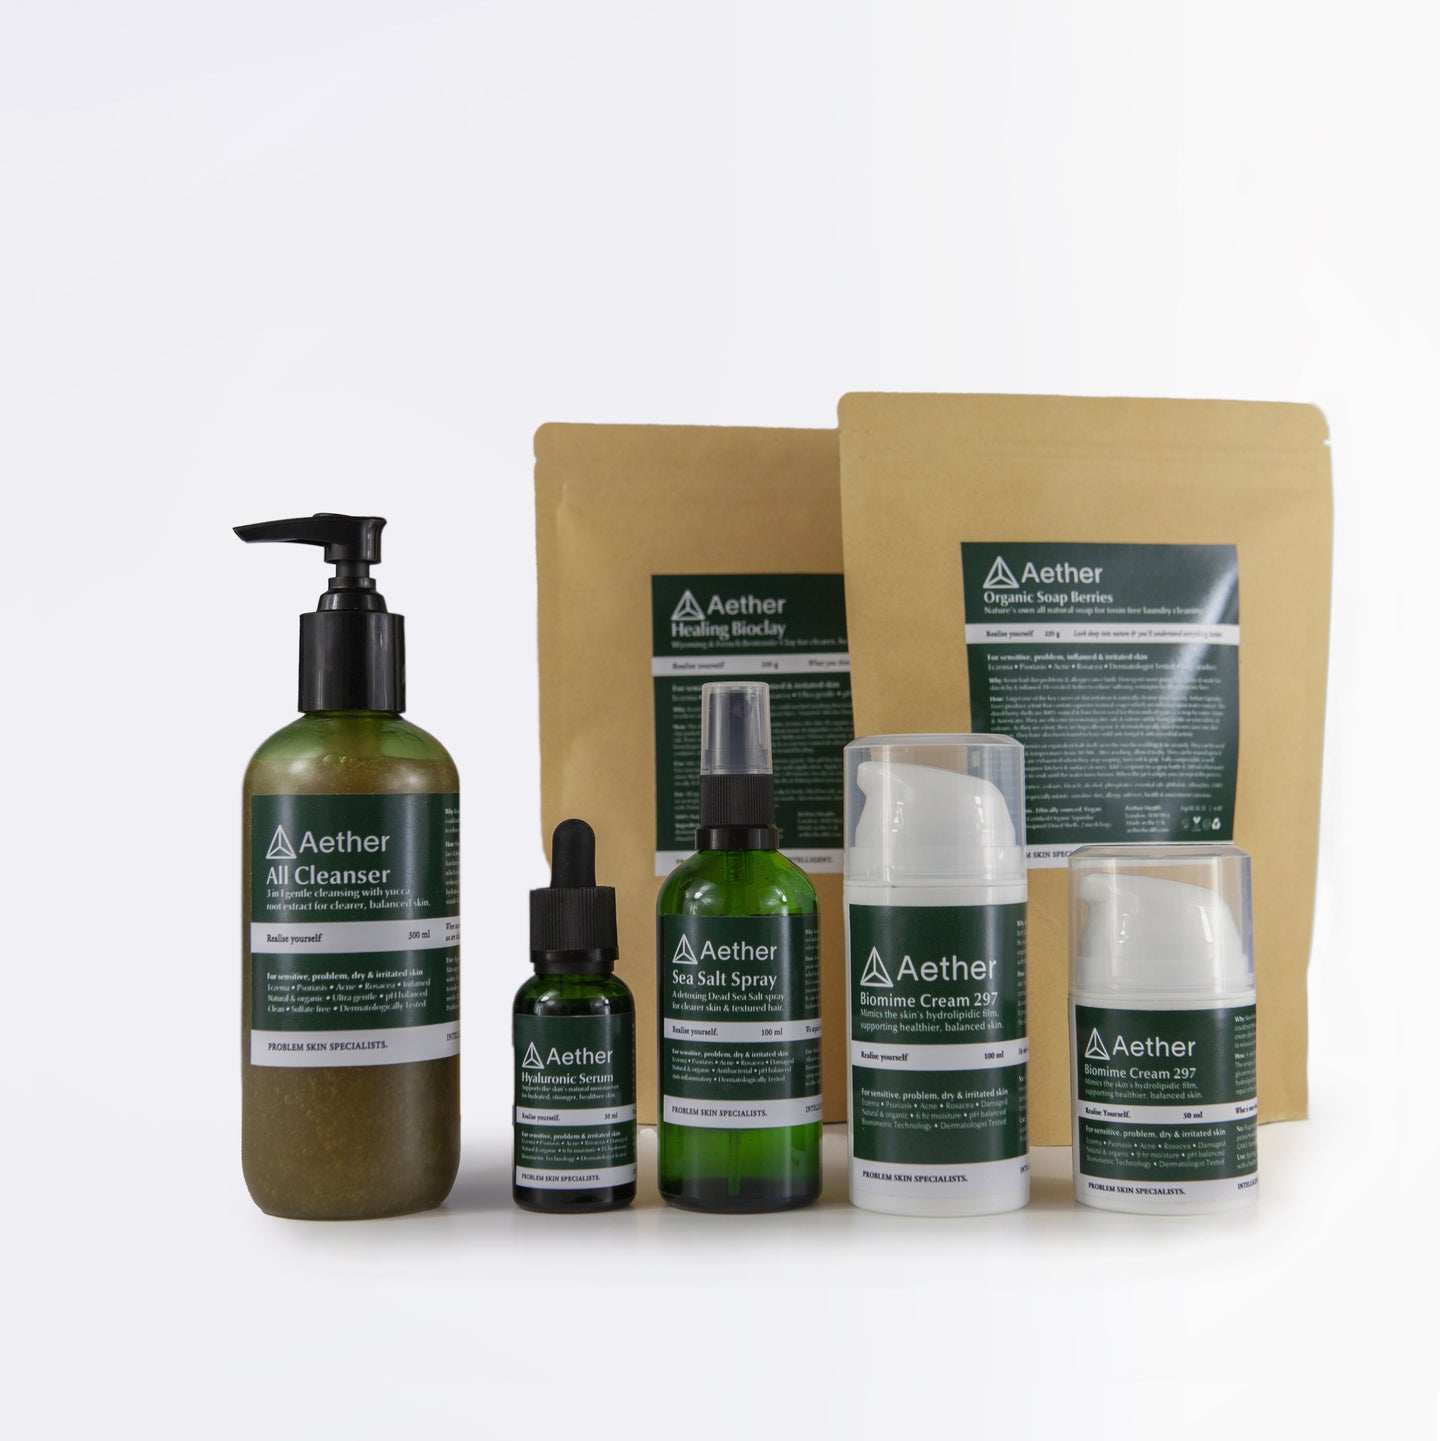 The complete range of Aether Health 100% Natural, Minimal, Green Skincare products.